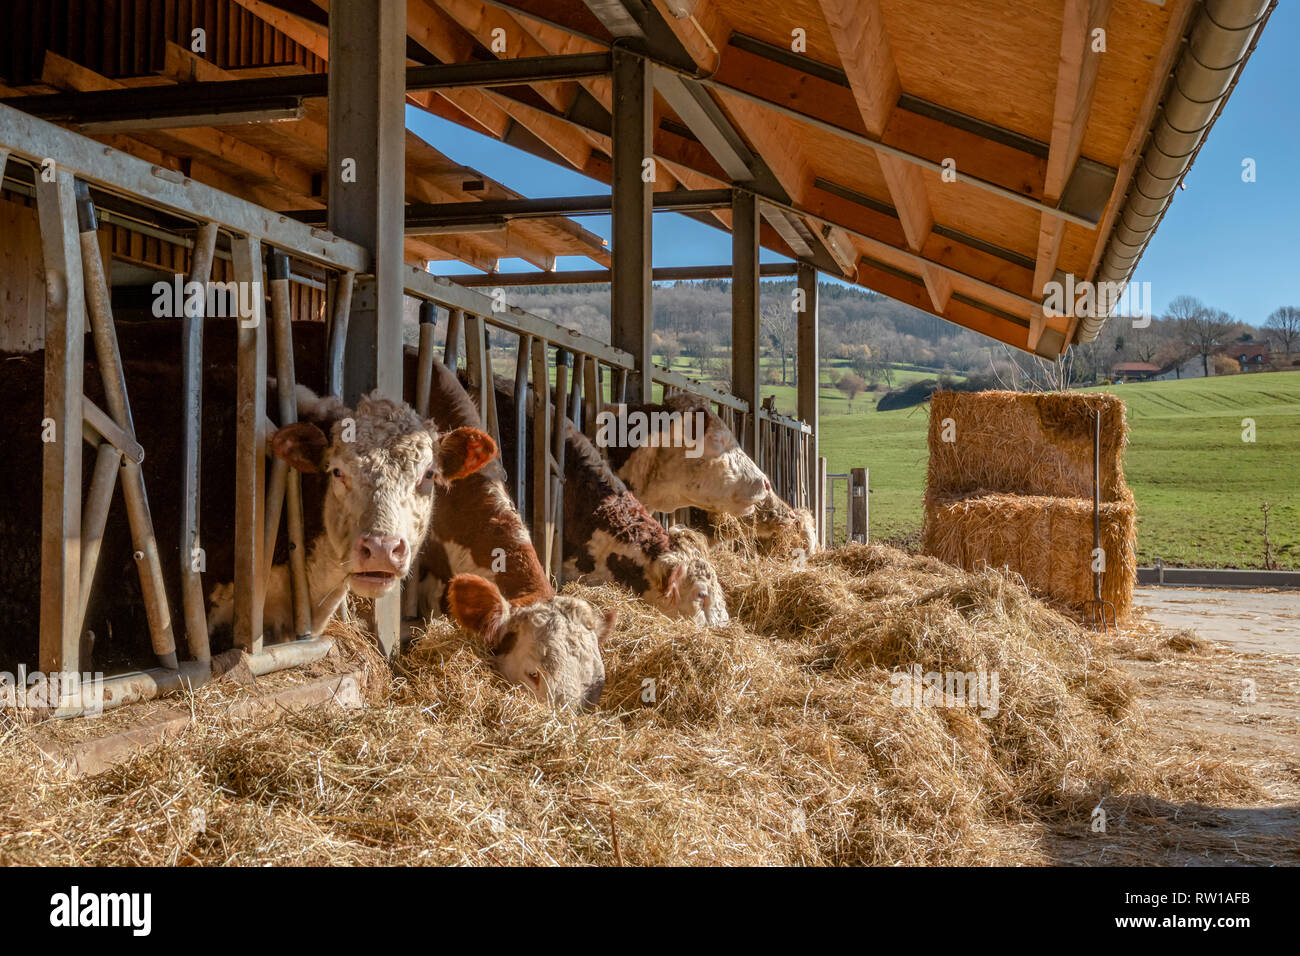 Cows are standing in the covered barn and eating the dried straw with a meadow with green grass in the background. Stock Photo